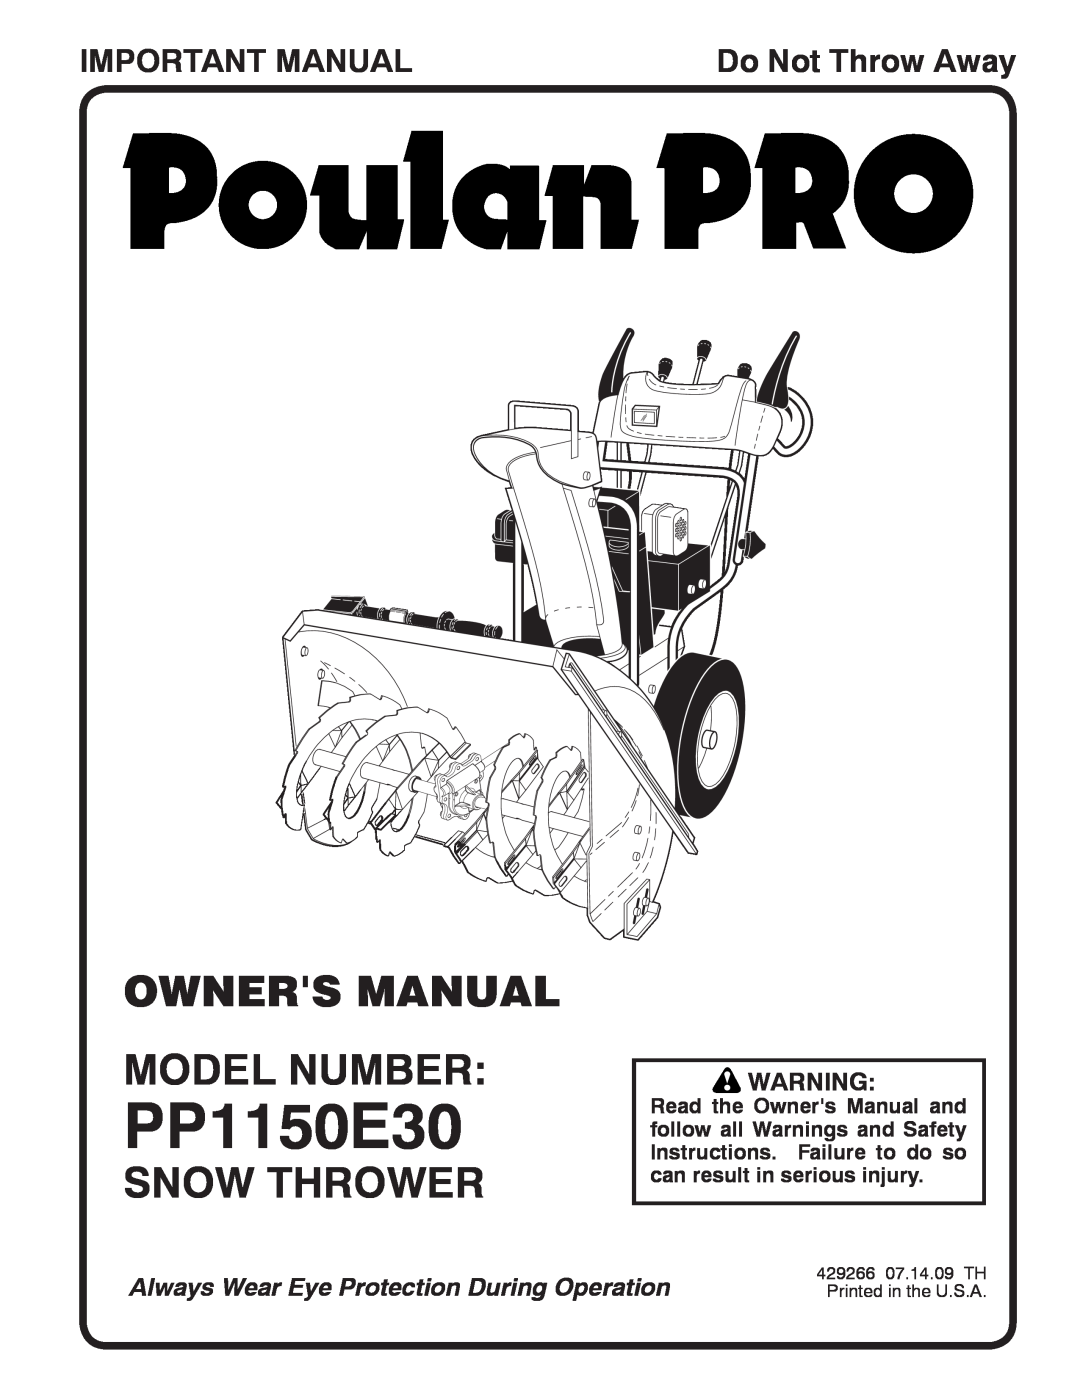 Poulan PP1150E30 owner manual Snow Thrower, Important Manual, Do Not Throw Away 